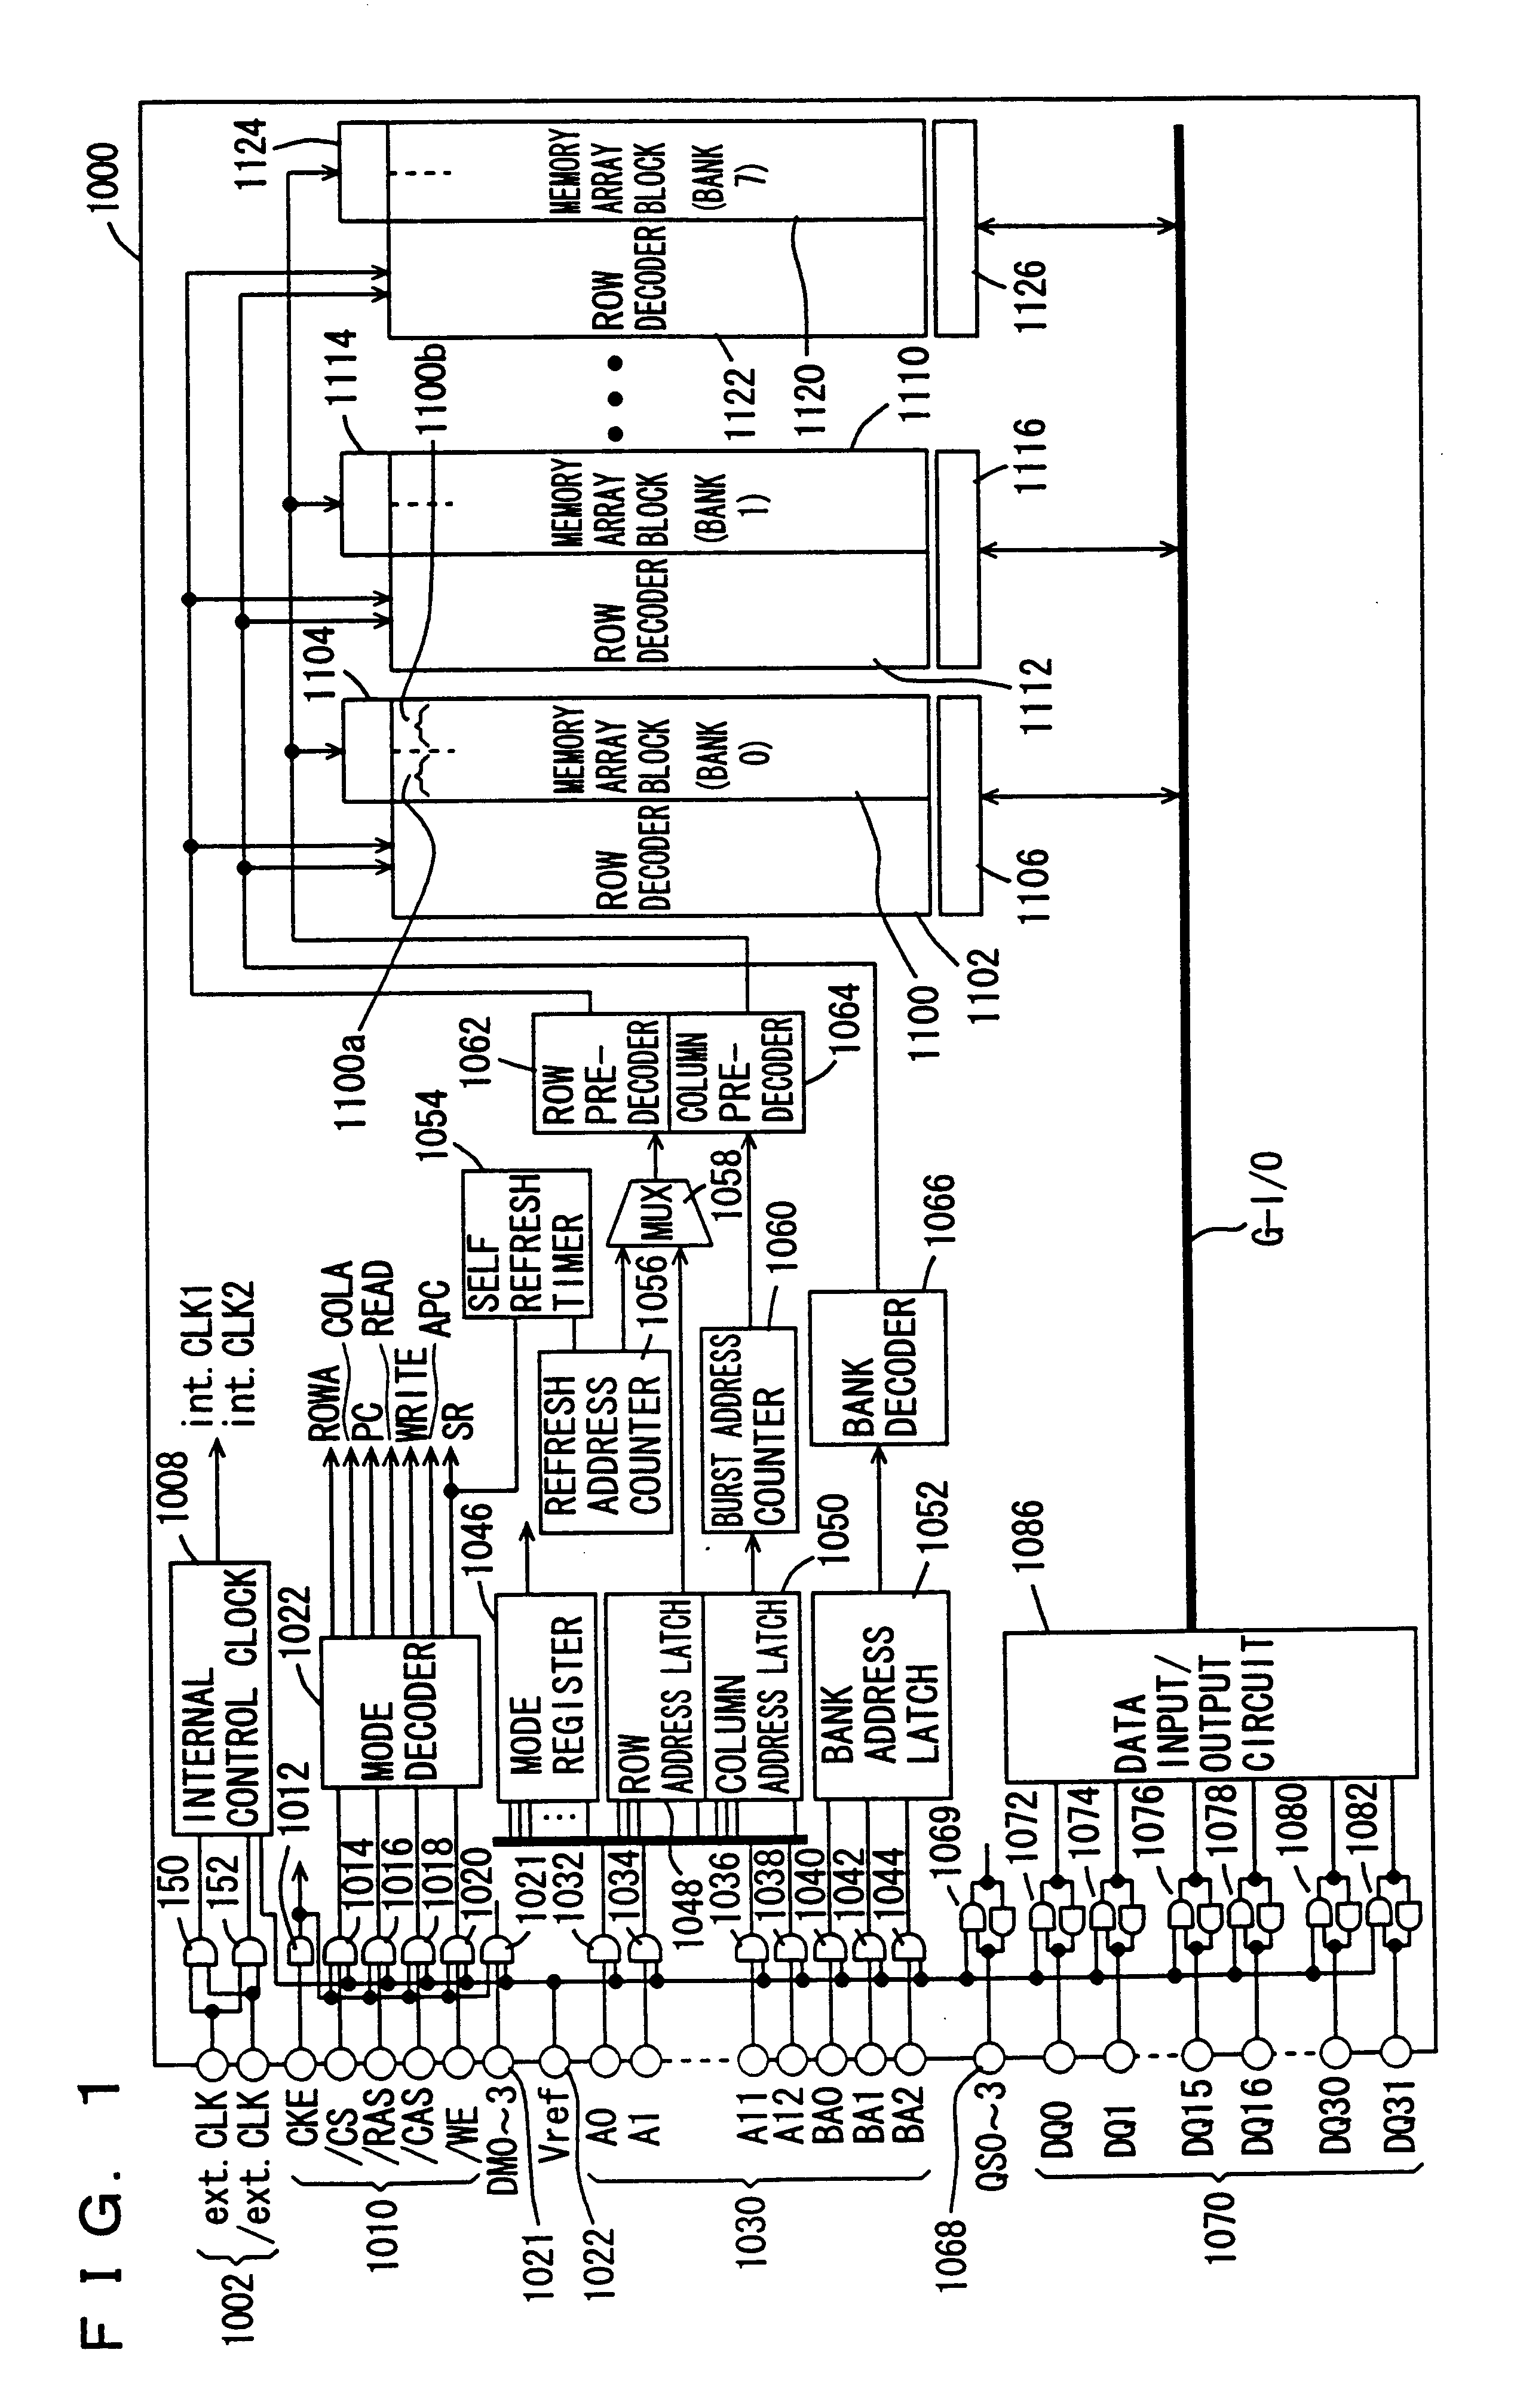 Operable synchronous semiconductor memory device switching between single data rate mode and double data rate mode